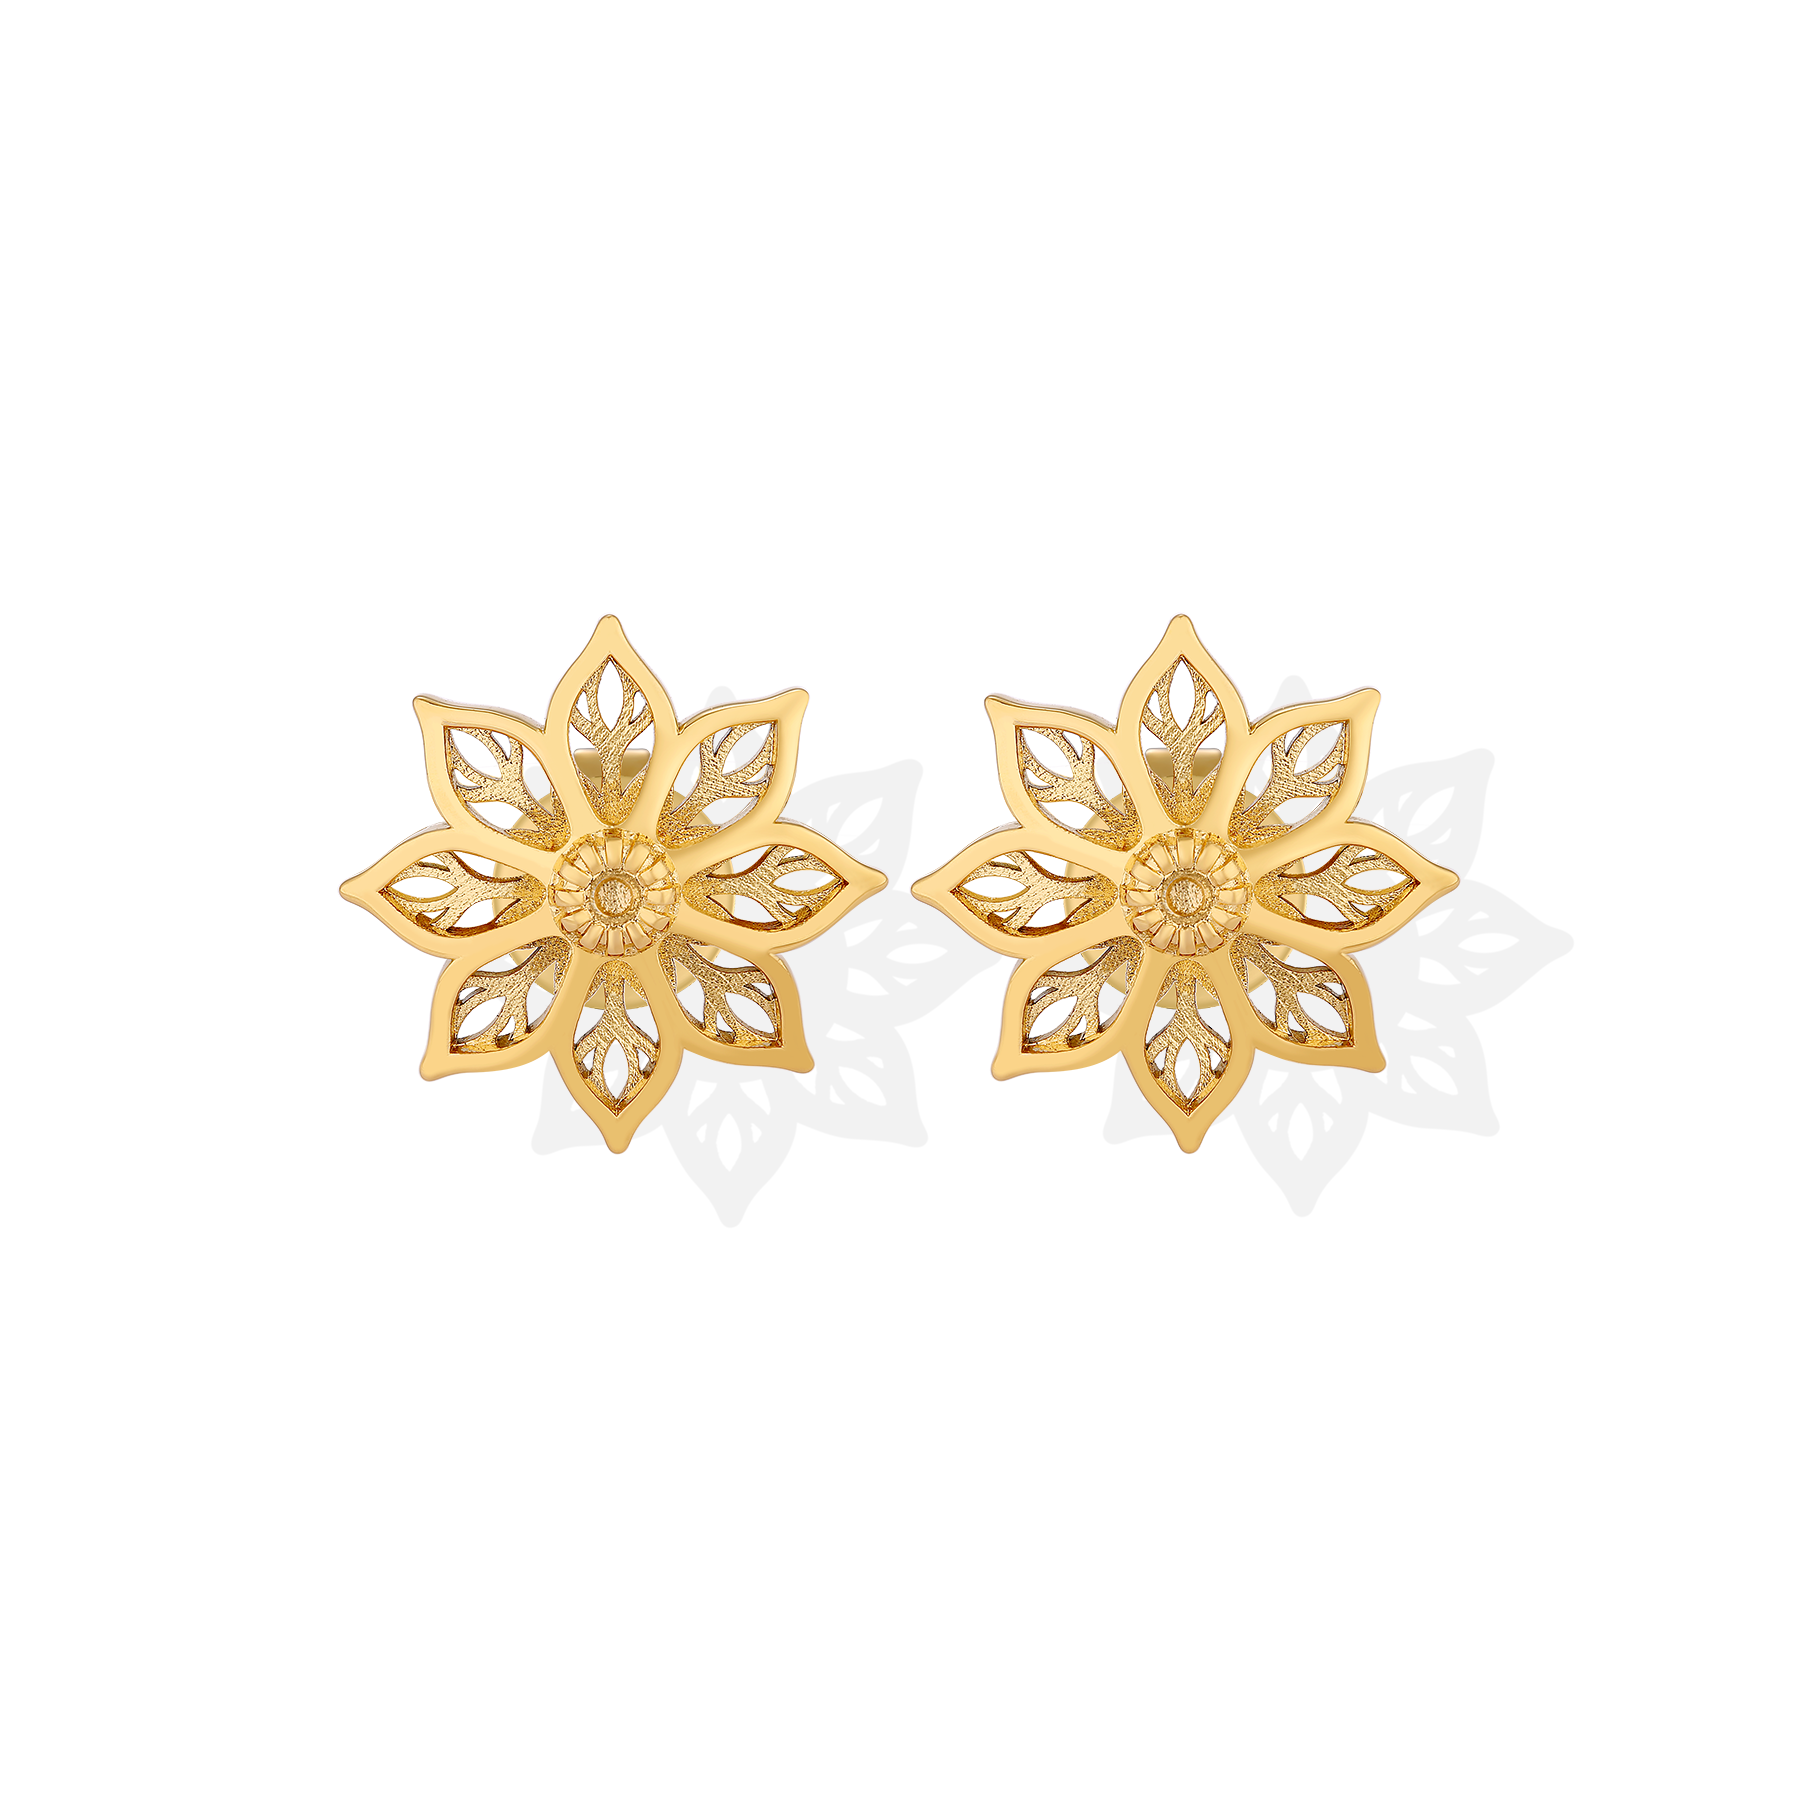 The Hollow Out Flower Design Gold Plating Earring Jewelry